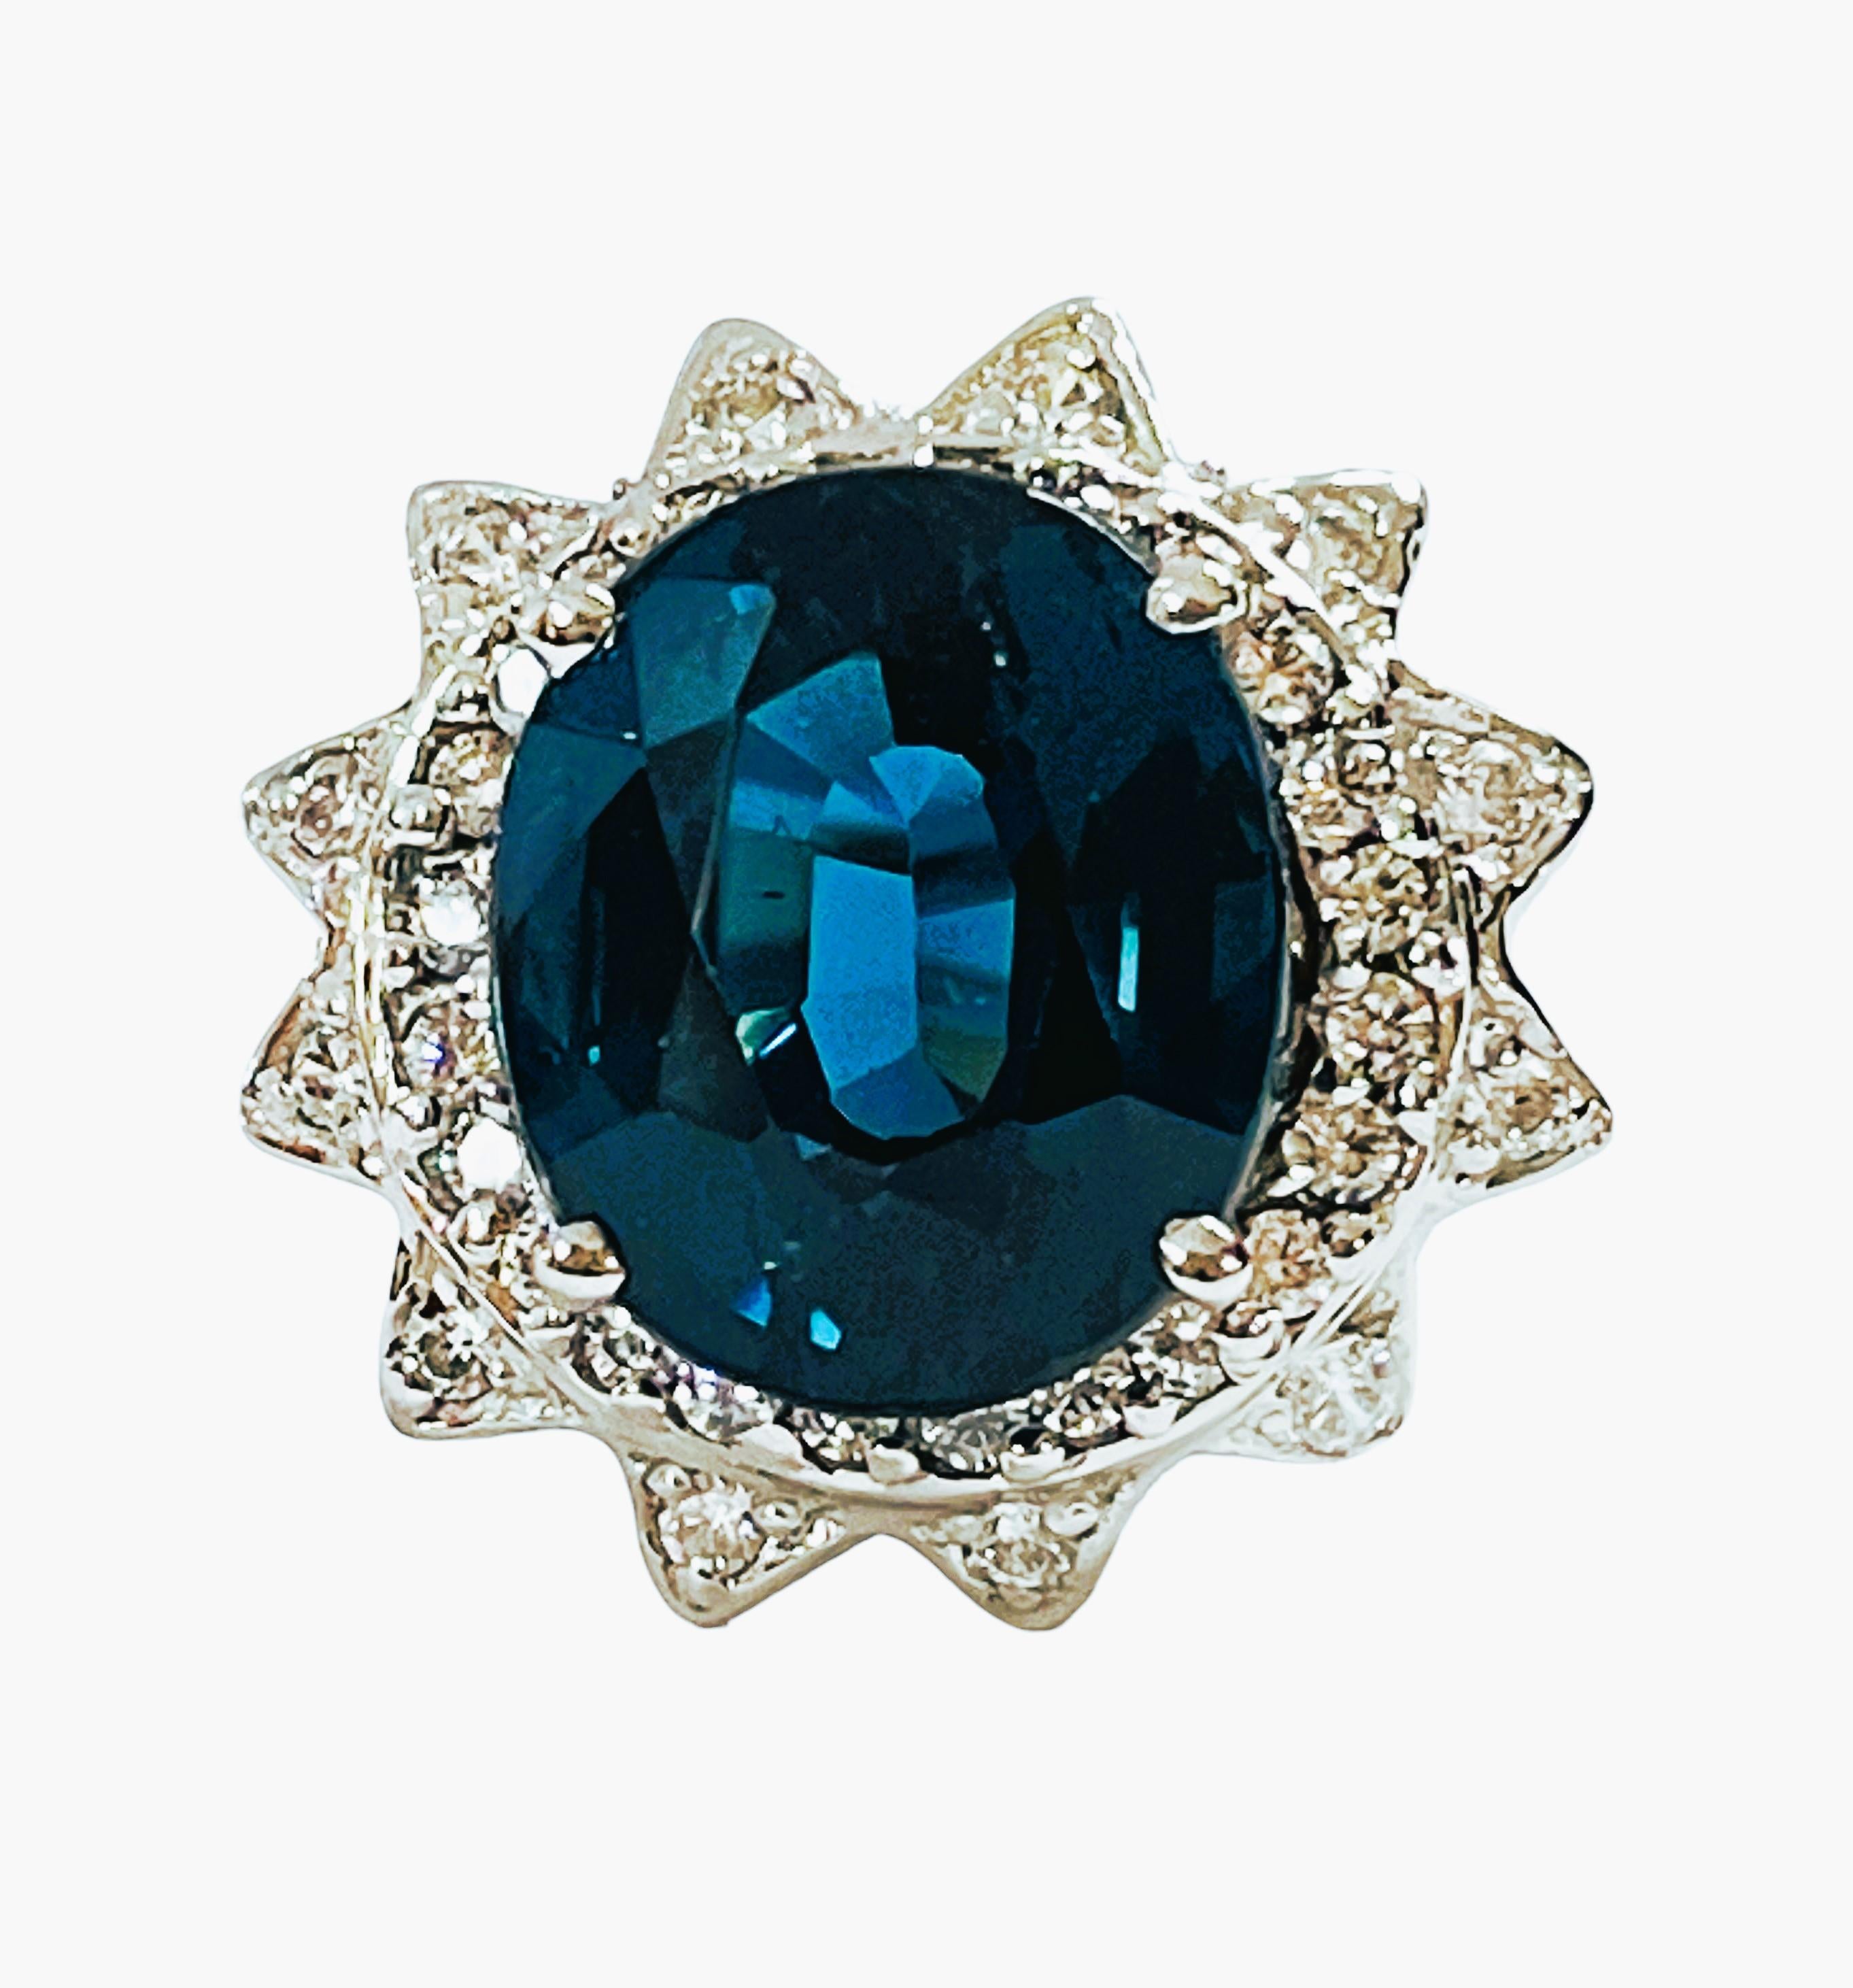 The ring is a size 5.75.  It's a beautiful statement ring and the stone is just stunning.  It's a deep blue teal color.  I don't believe I've had one in this stunning color before.   It's just beautifully cut.  It is 8.60 carats and measures 13 x